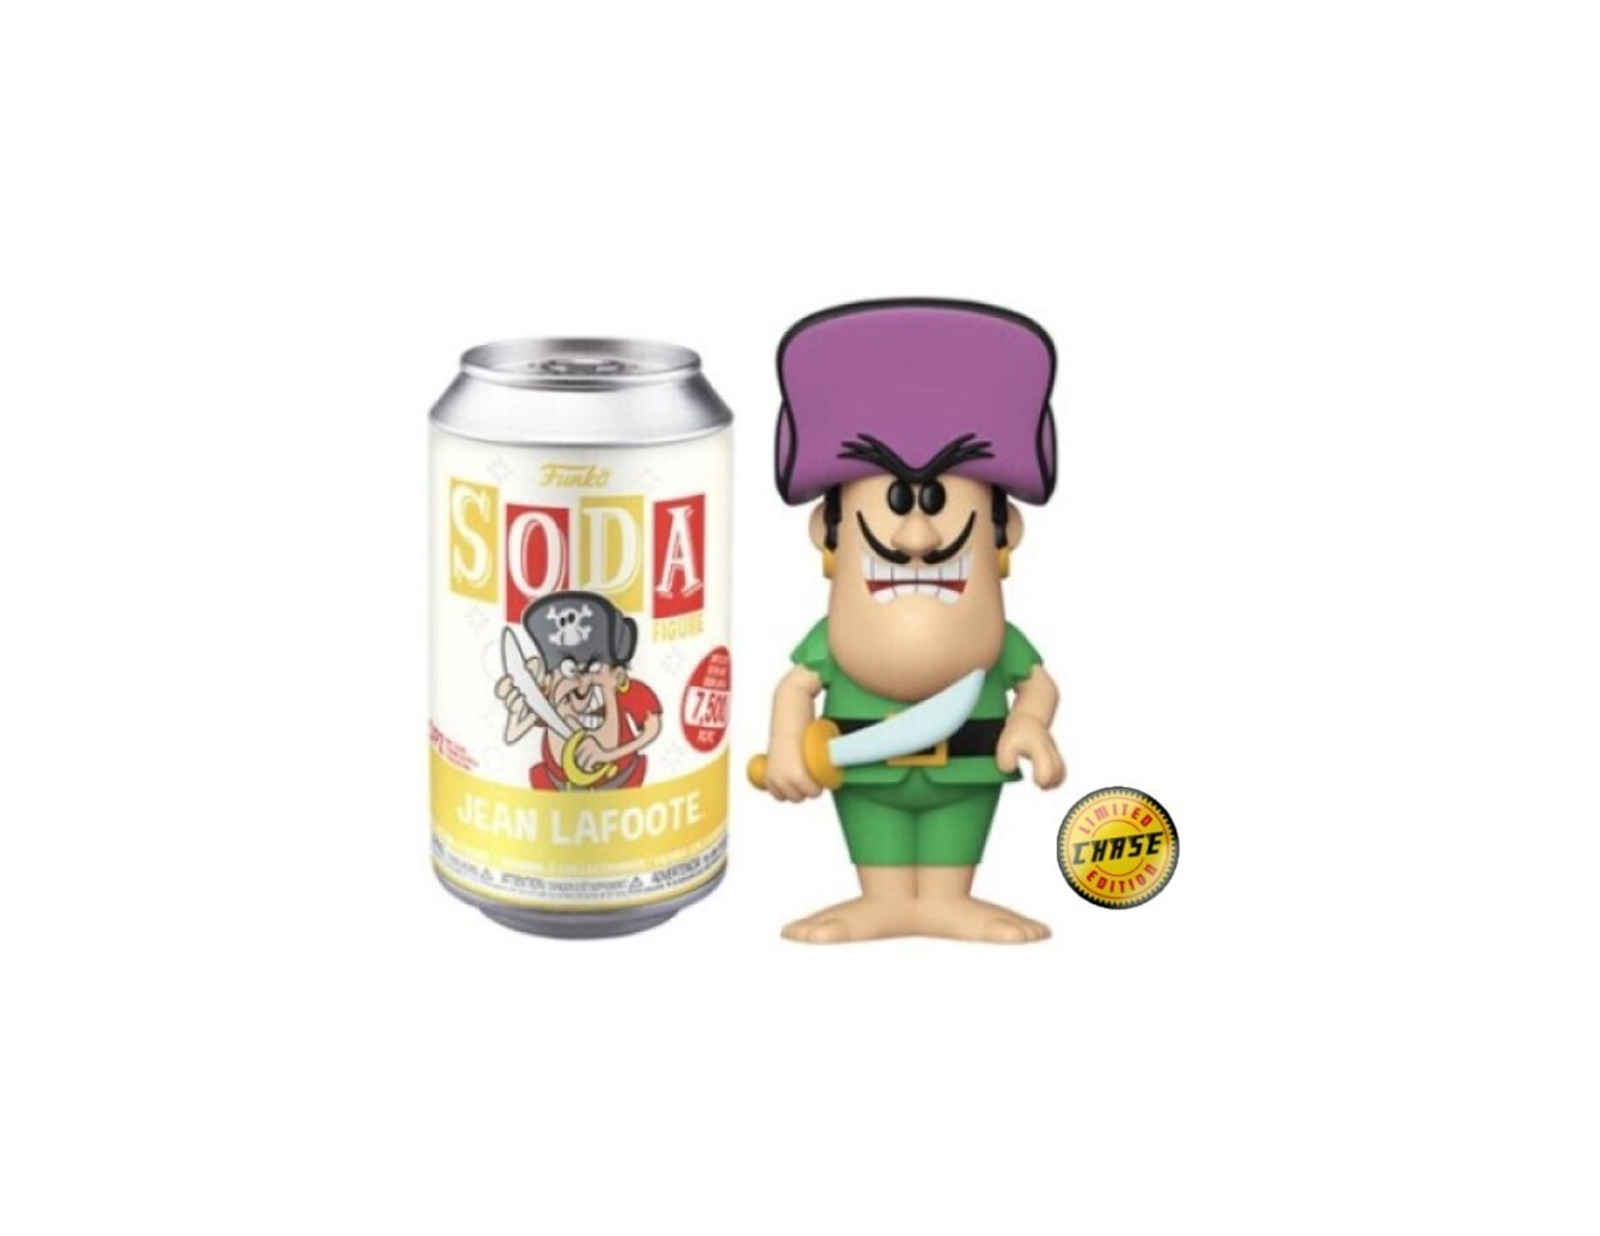 Funko Soda Cap\'n Crunch- Jean LaFoote (Chase & Common) (Opened) (Limited 7,500)